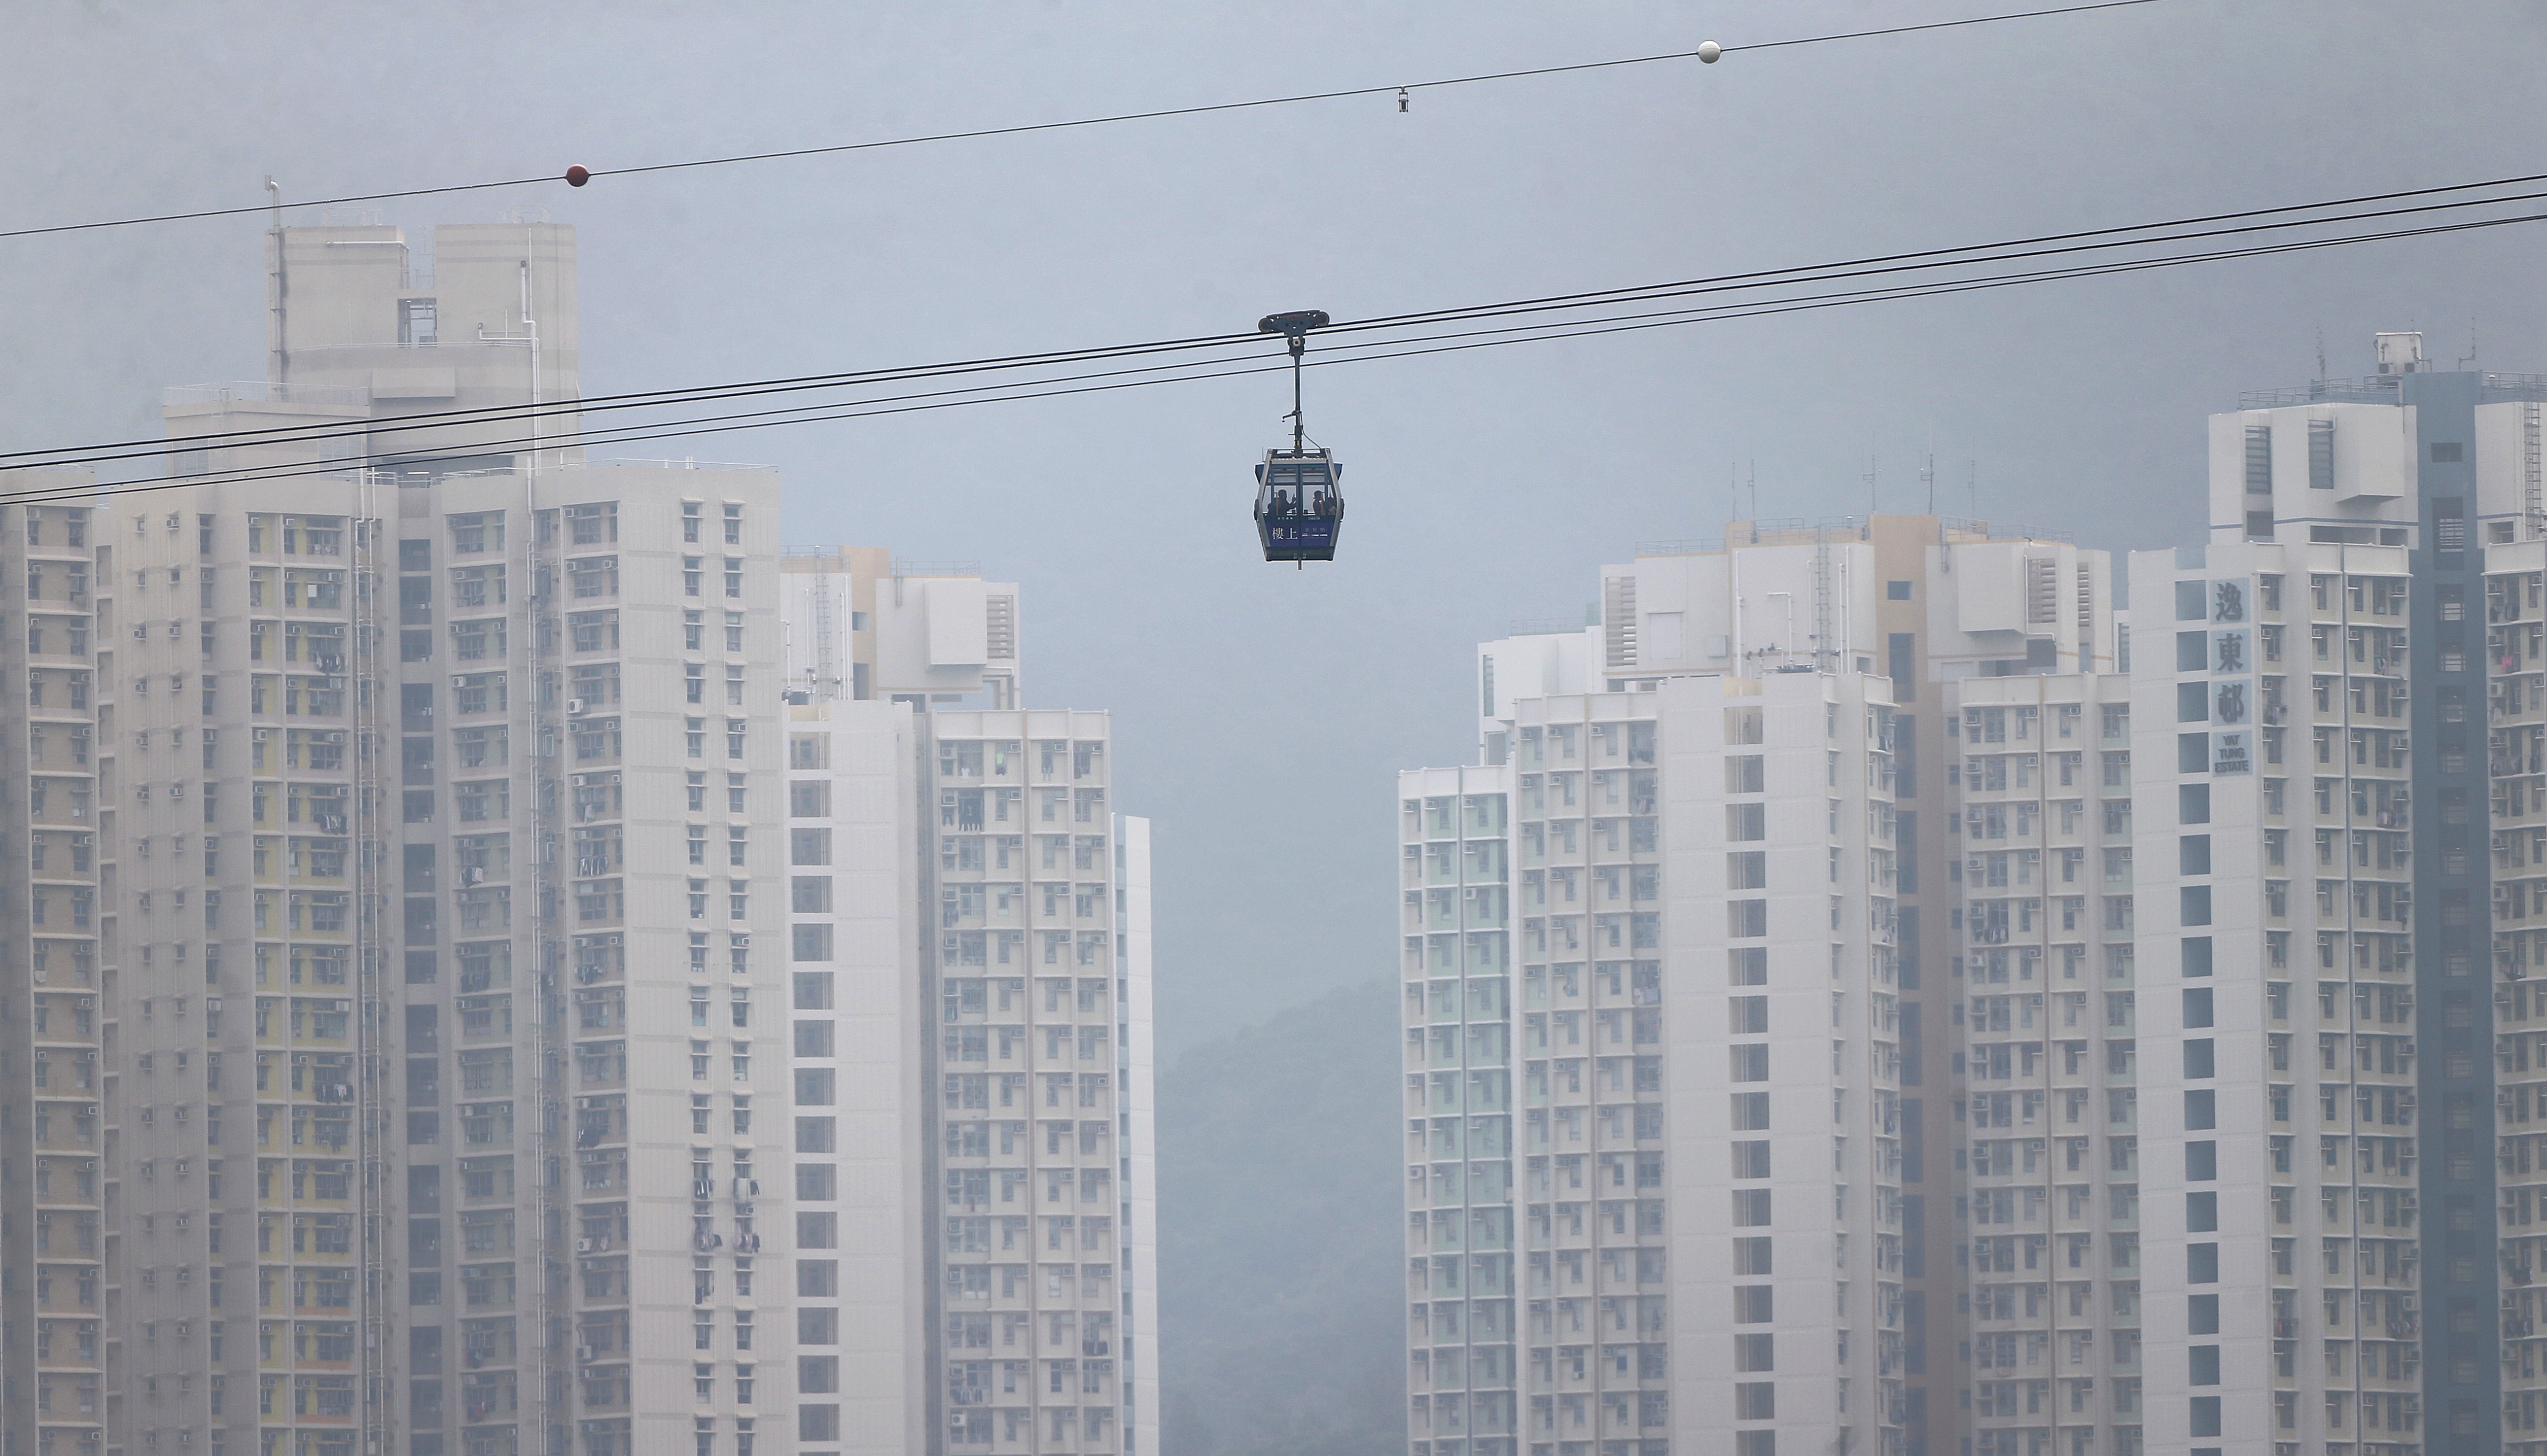 The Ngong Ping 360 cable car service will resume when the weather improves. Photo: Sam Tsang